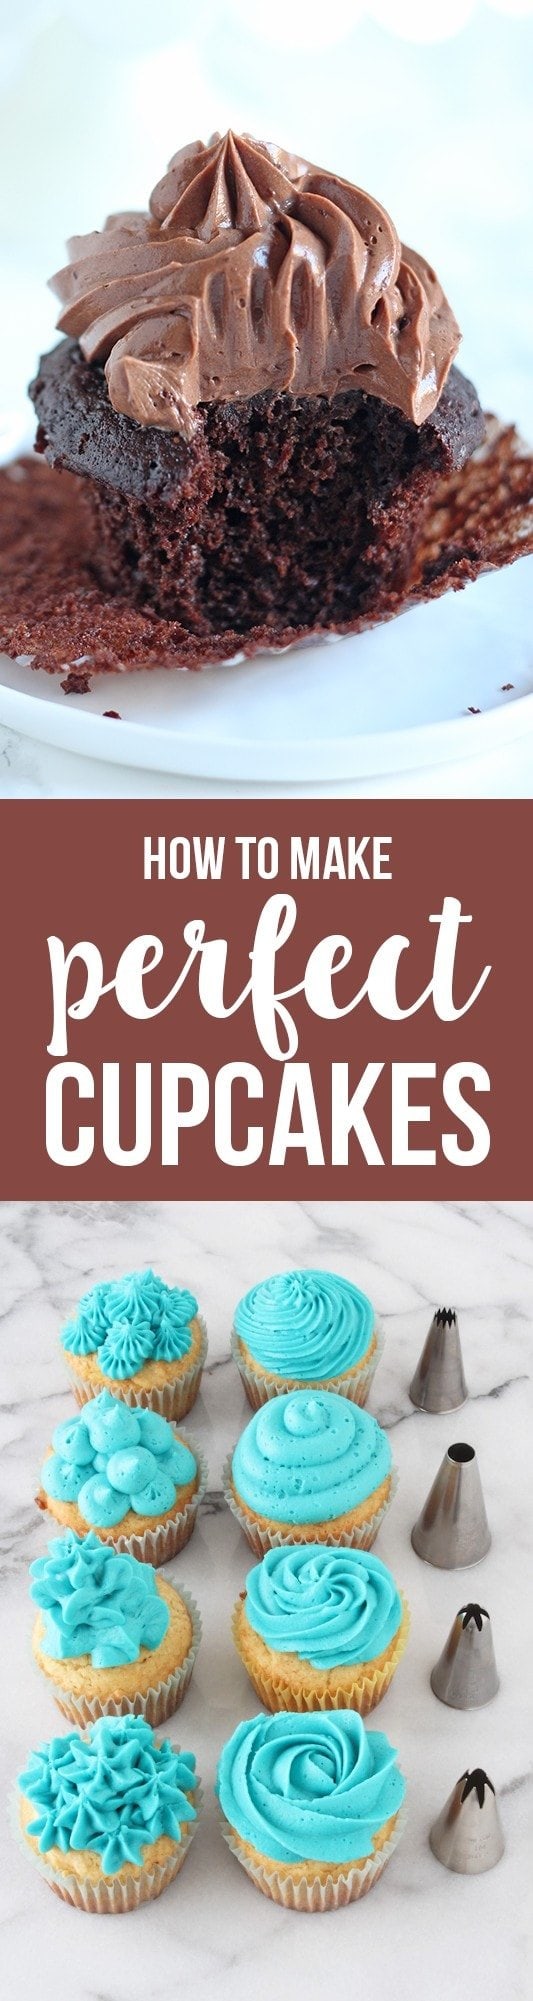 HOT PIN! Make PERFECTLY moist, flavorful, and beautiful cupcakes with EVERY TIP you'd ever need!